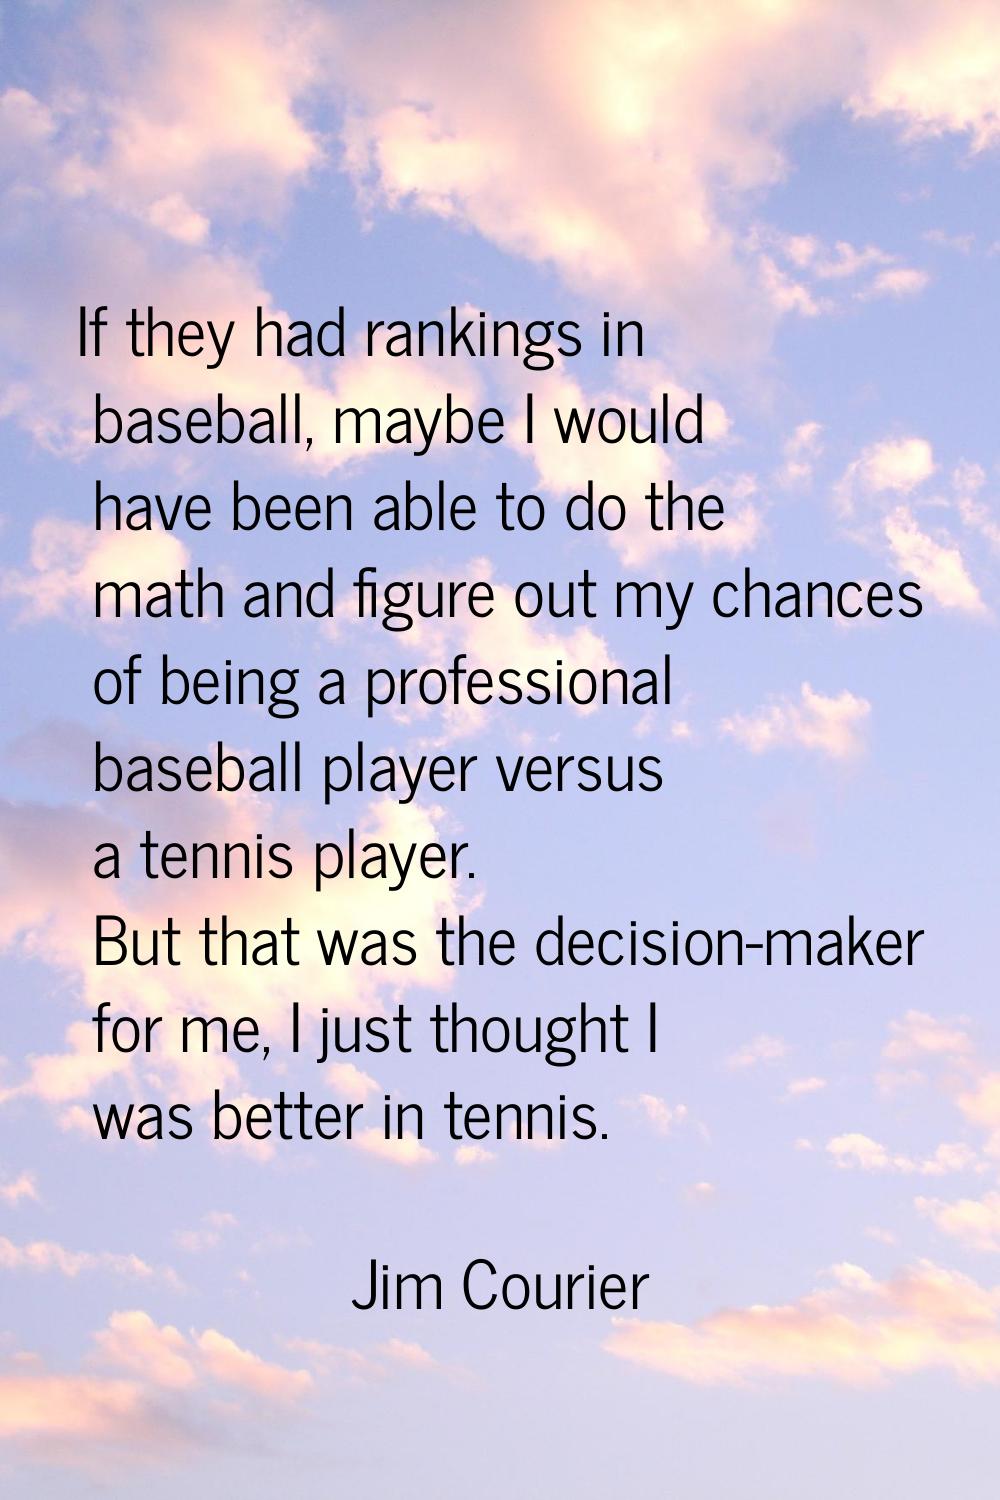 If they had rankings in baseball, maybe I would have been able to do the math and figure out my cha